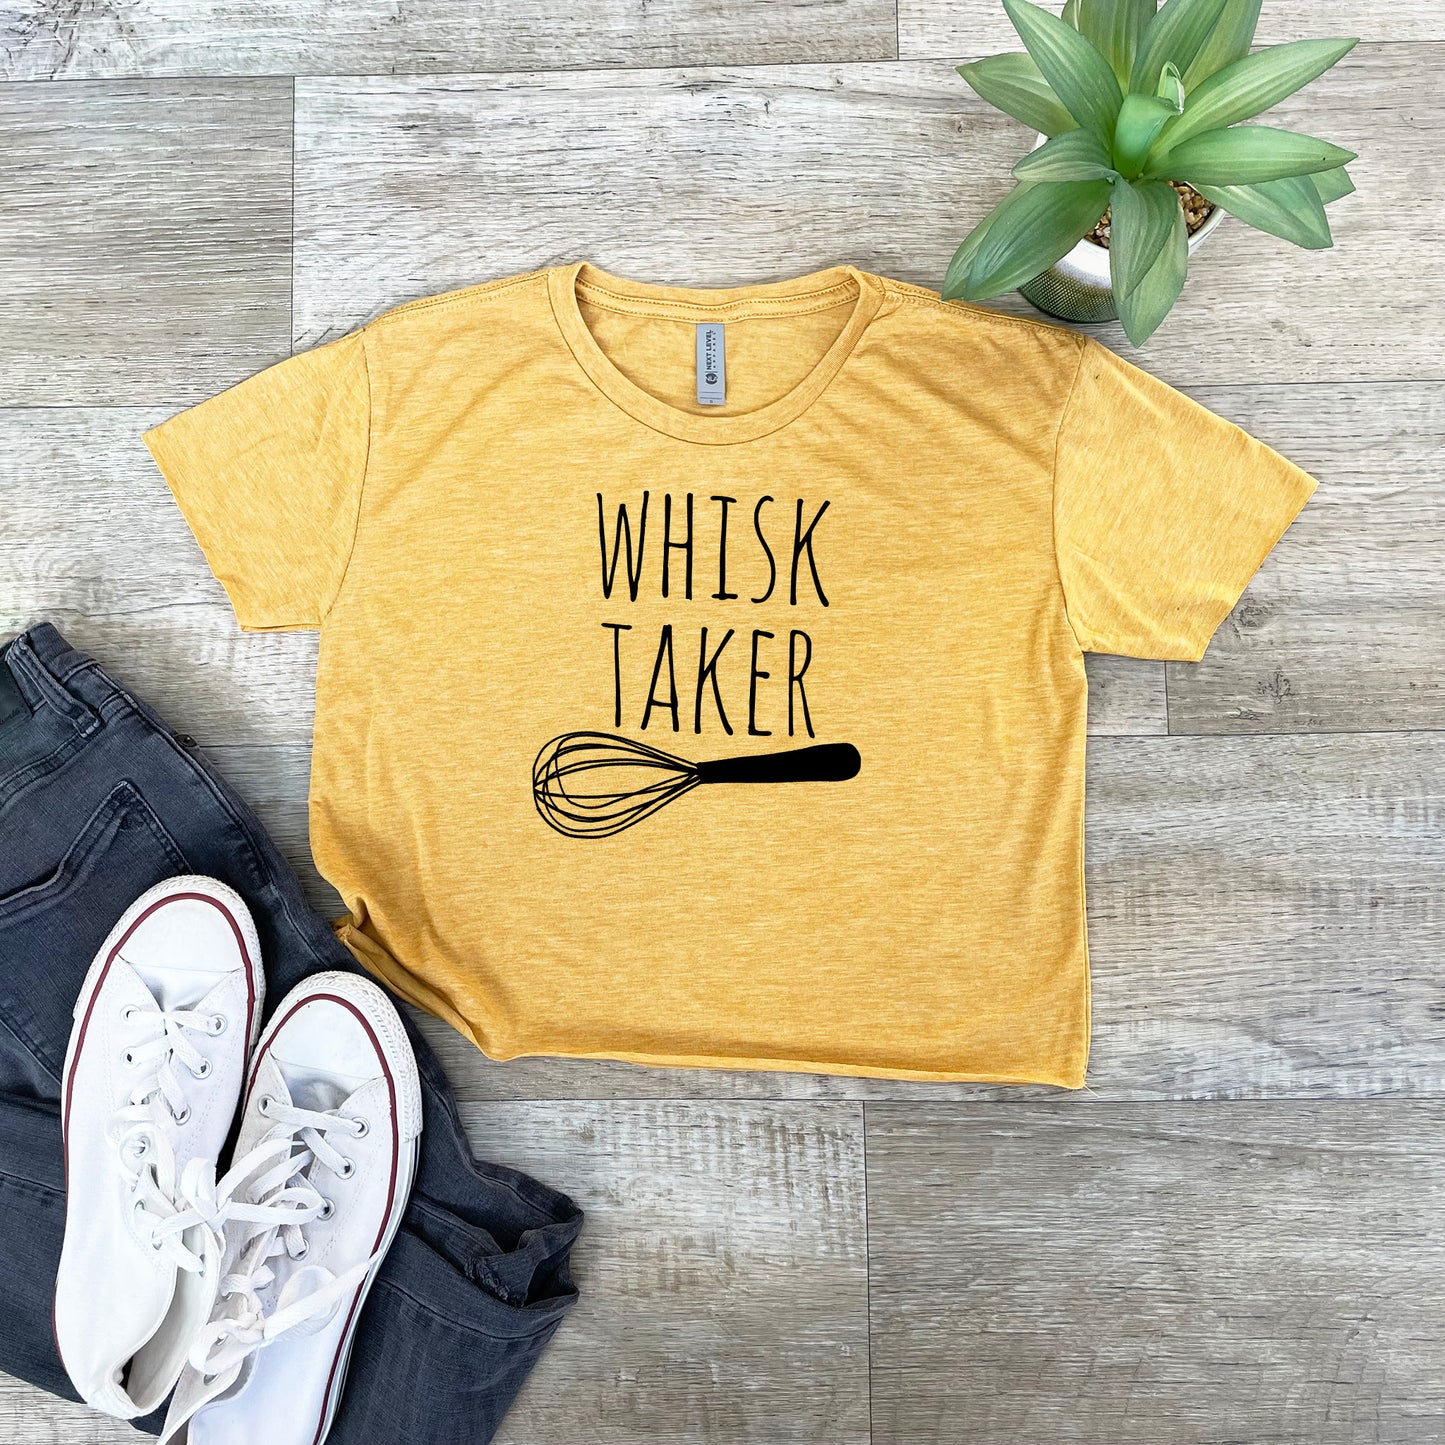 Whisk Taker (Baking) - Women's Crop Tee - Heather Gray or Gold